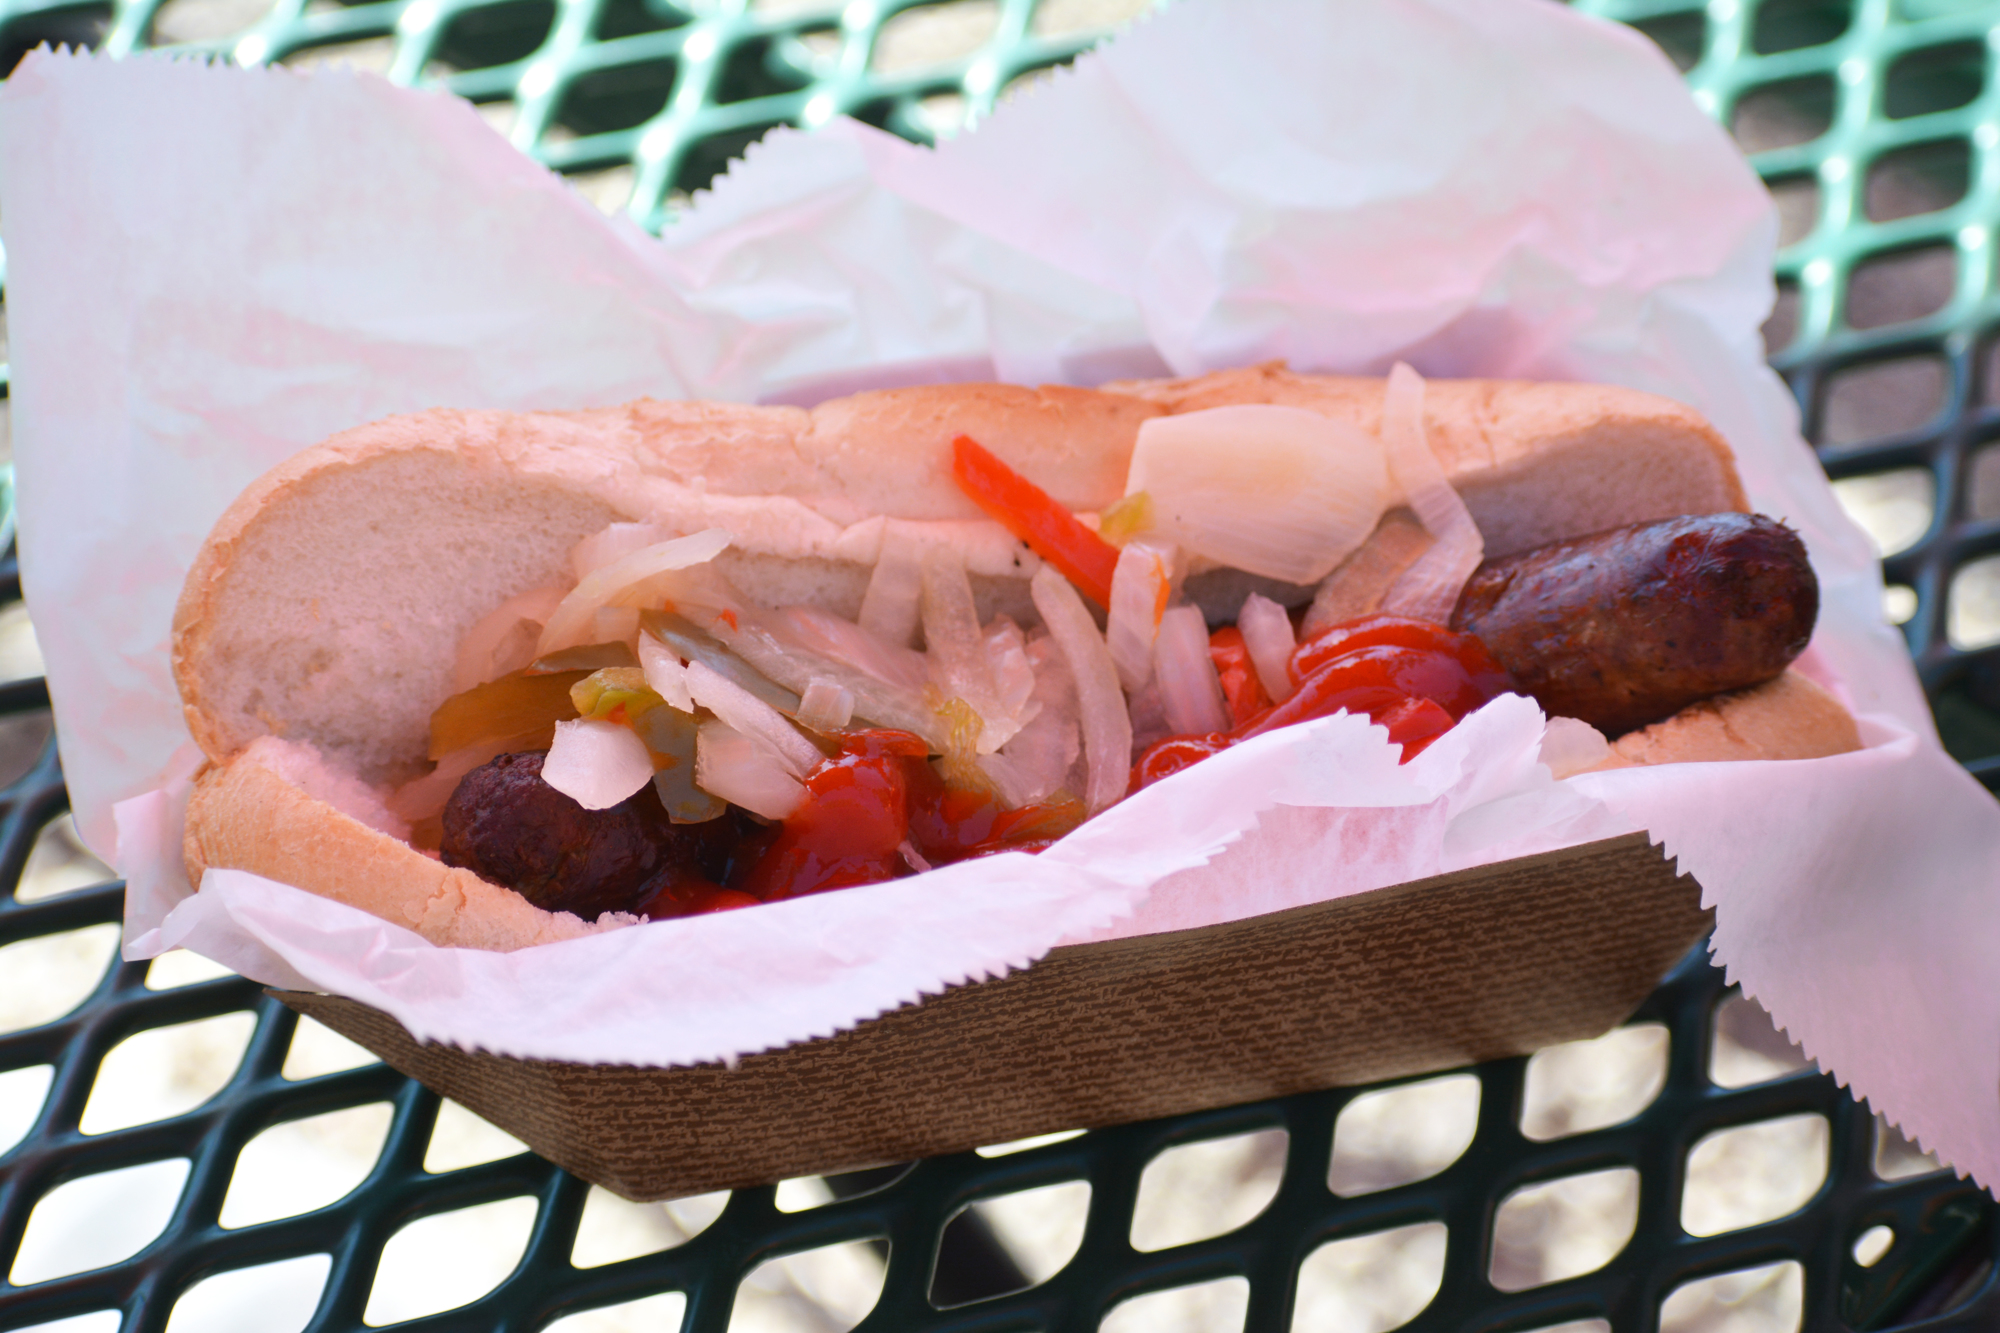 An Italian sausage with peppers and onions from Boog's BBQ.